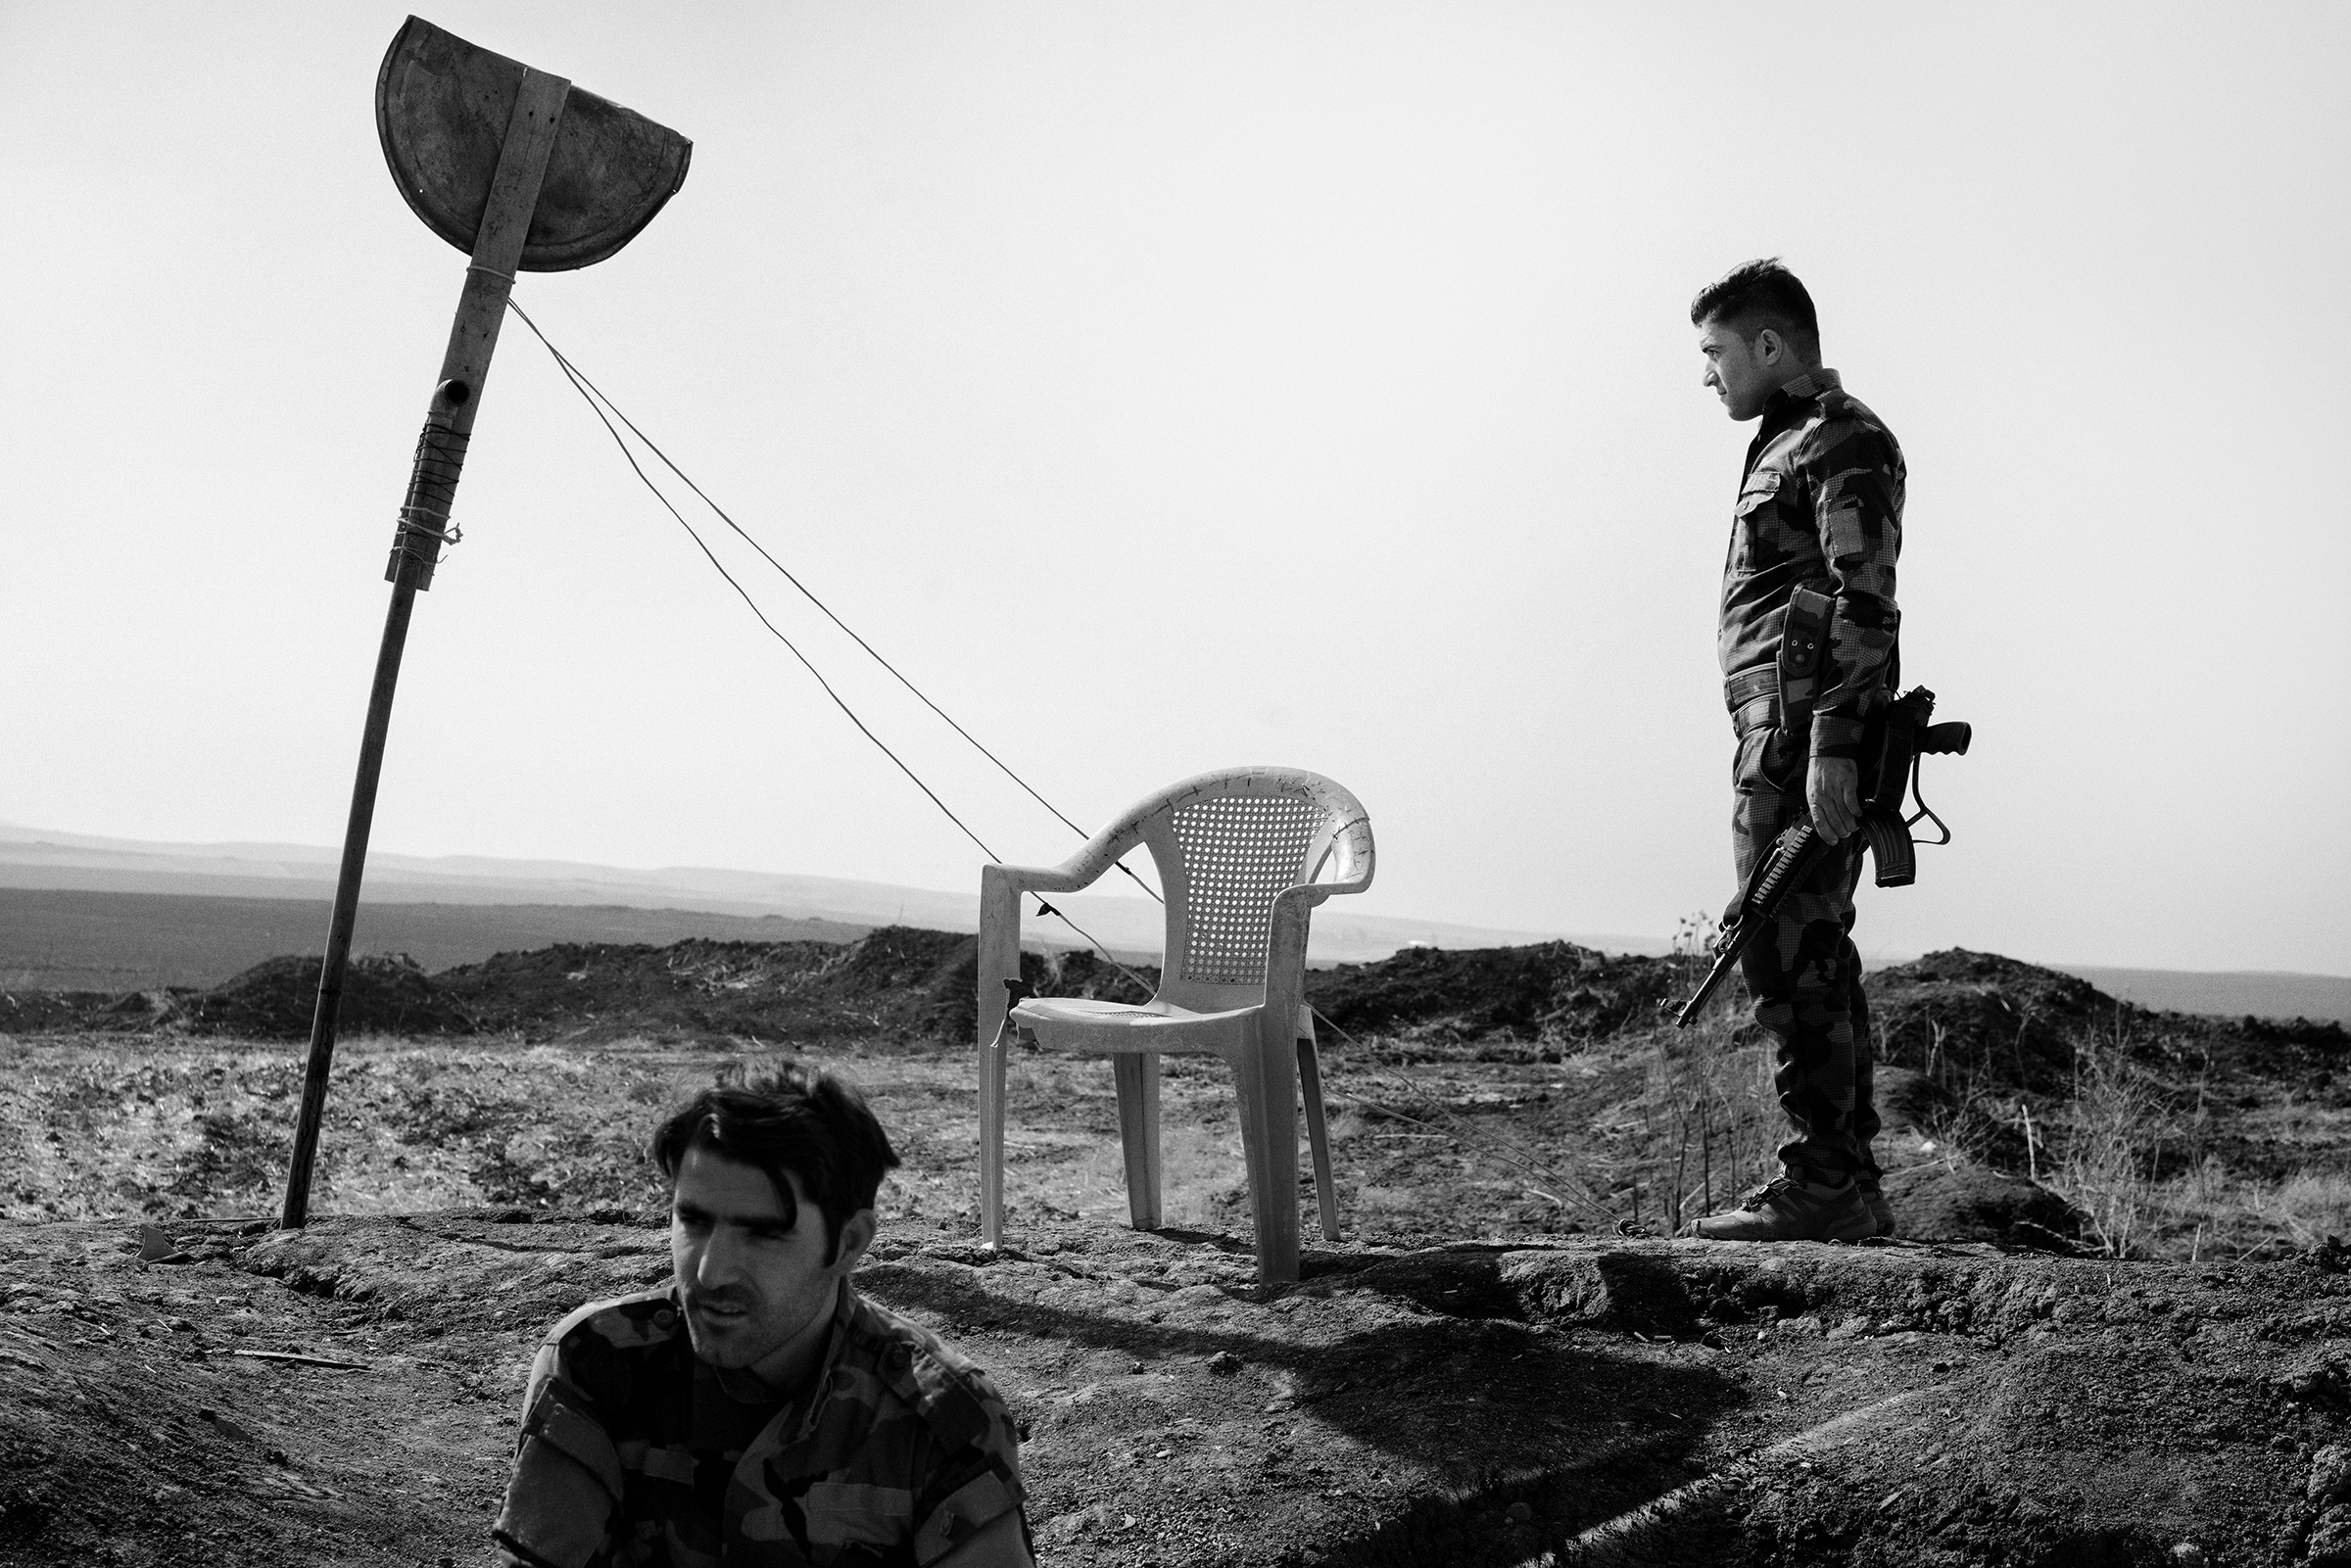 Kurdish fighters guard the new border between Kurdistan Regional Government-controlled territory and areas under the control of the Iraqi army near the town of Bashiqa, liberated from ISIS in 2016 by Iraqi and Kurdish forces. Nov. 25 issue. (Moises Saman—Magnum Photos for TIME)